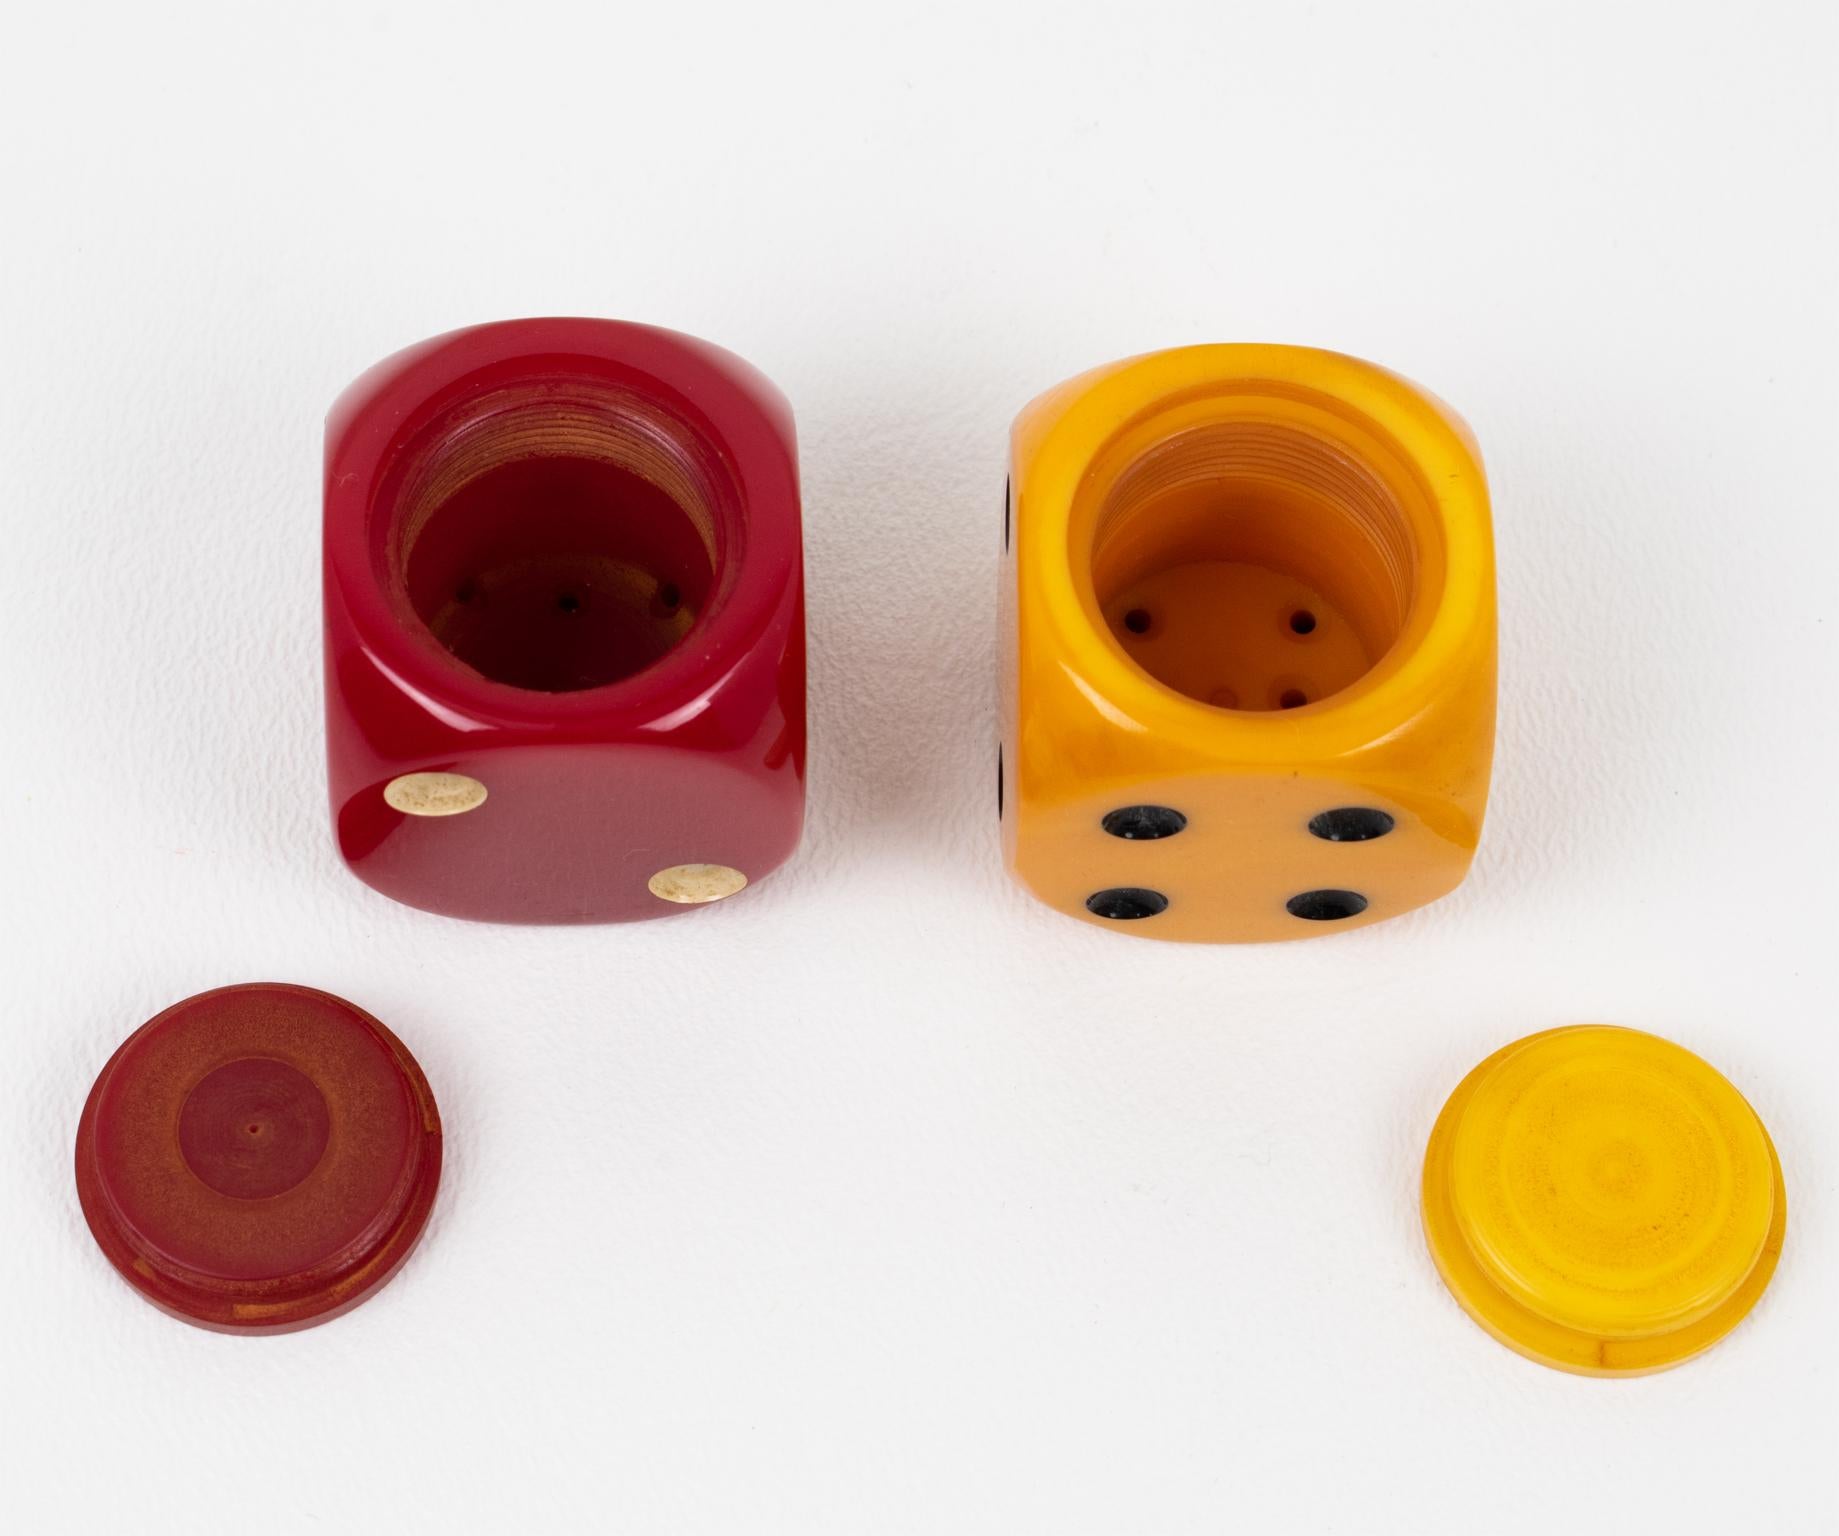 Art Deco Red, Yellow Bakelite Dice-Shaped Condiment Salt and Pepper Shakers Set For Sale 1